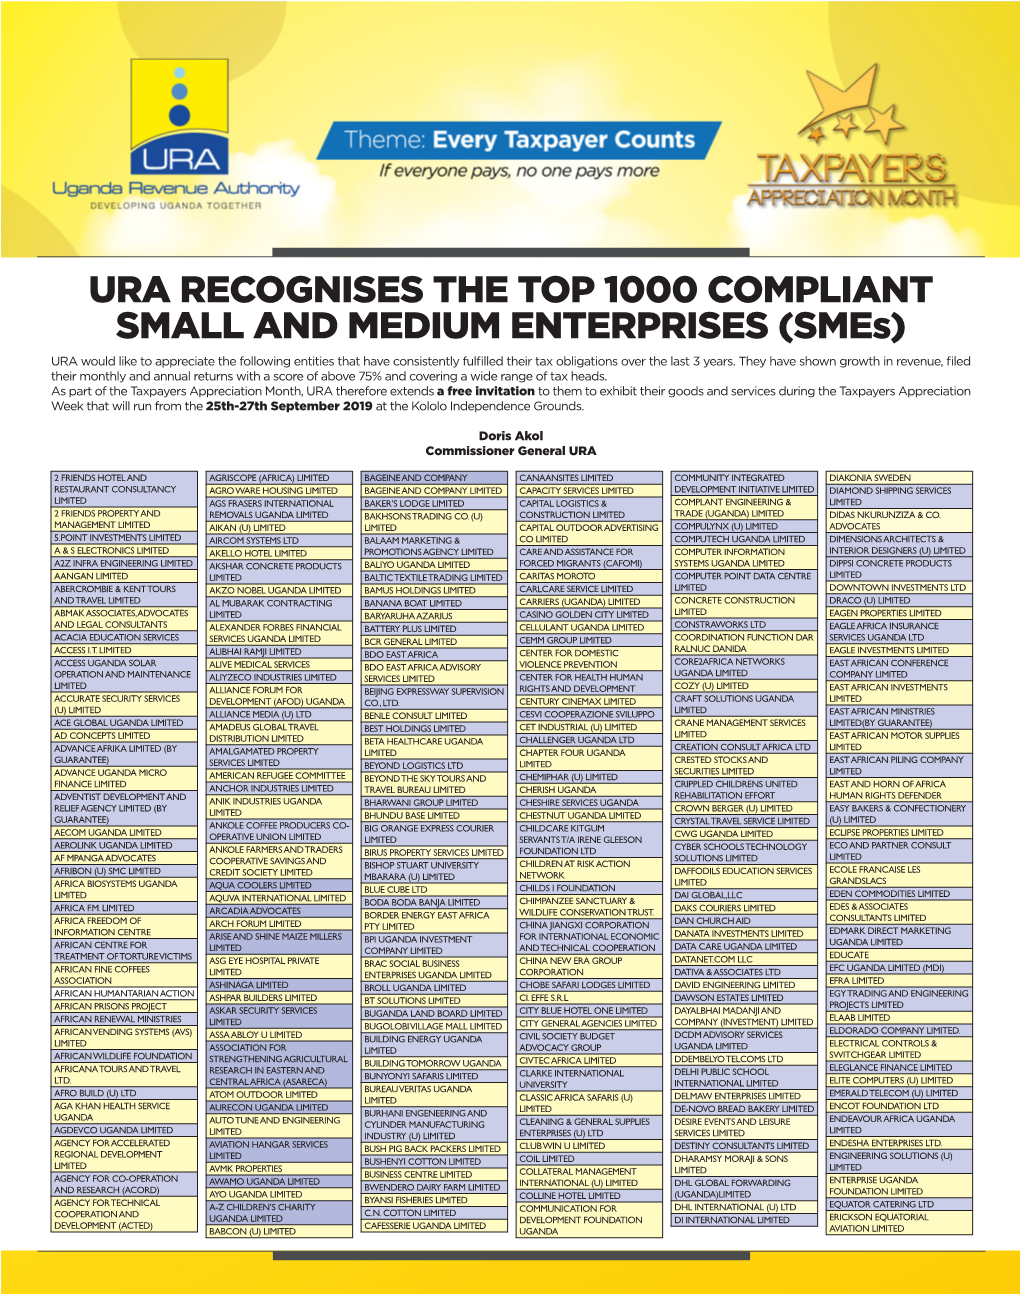 Ura Recognises the Top 1000 Compliant Small and Medium